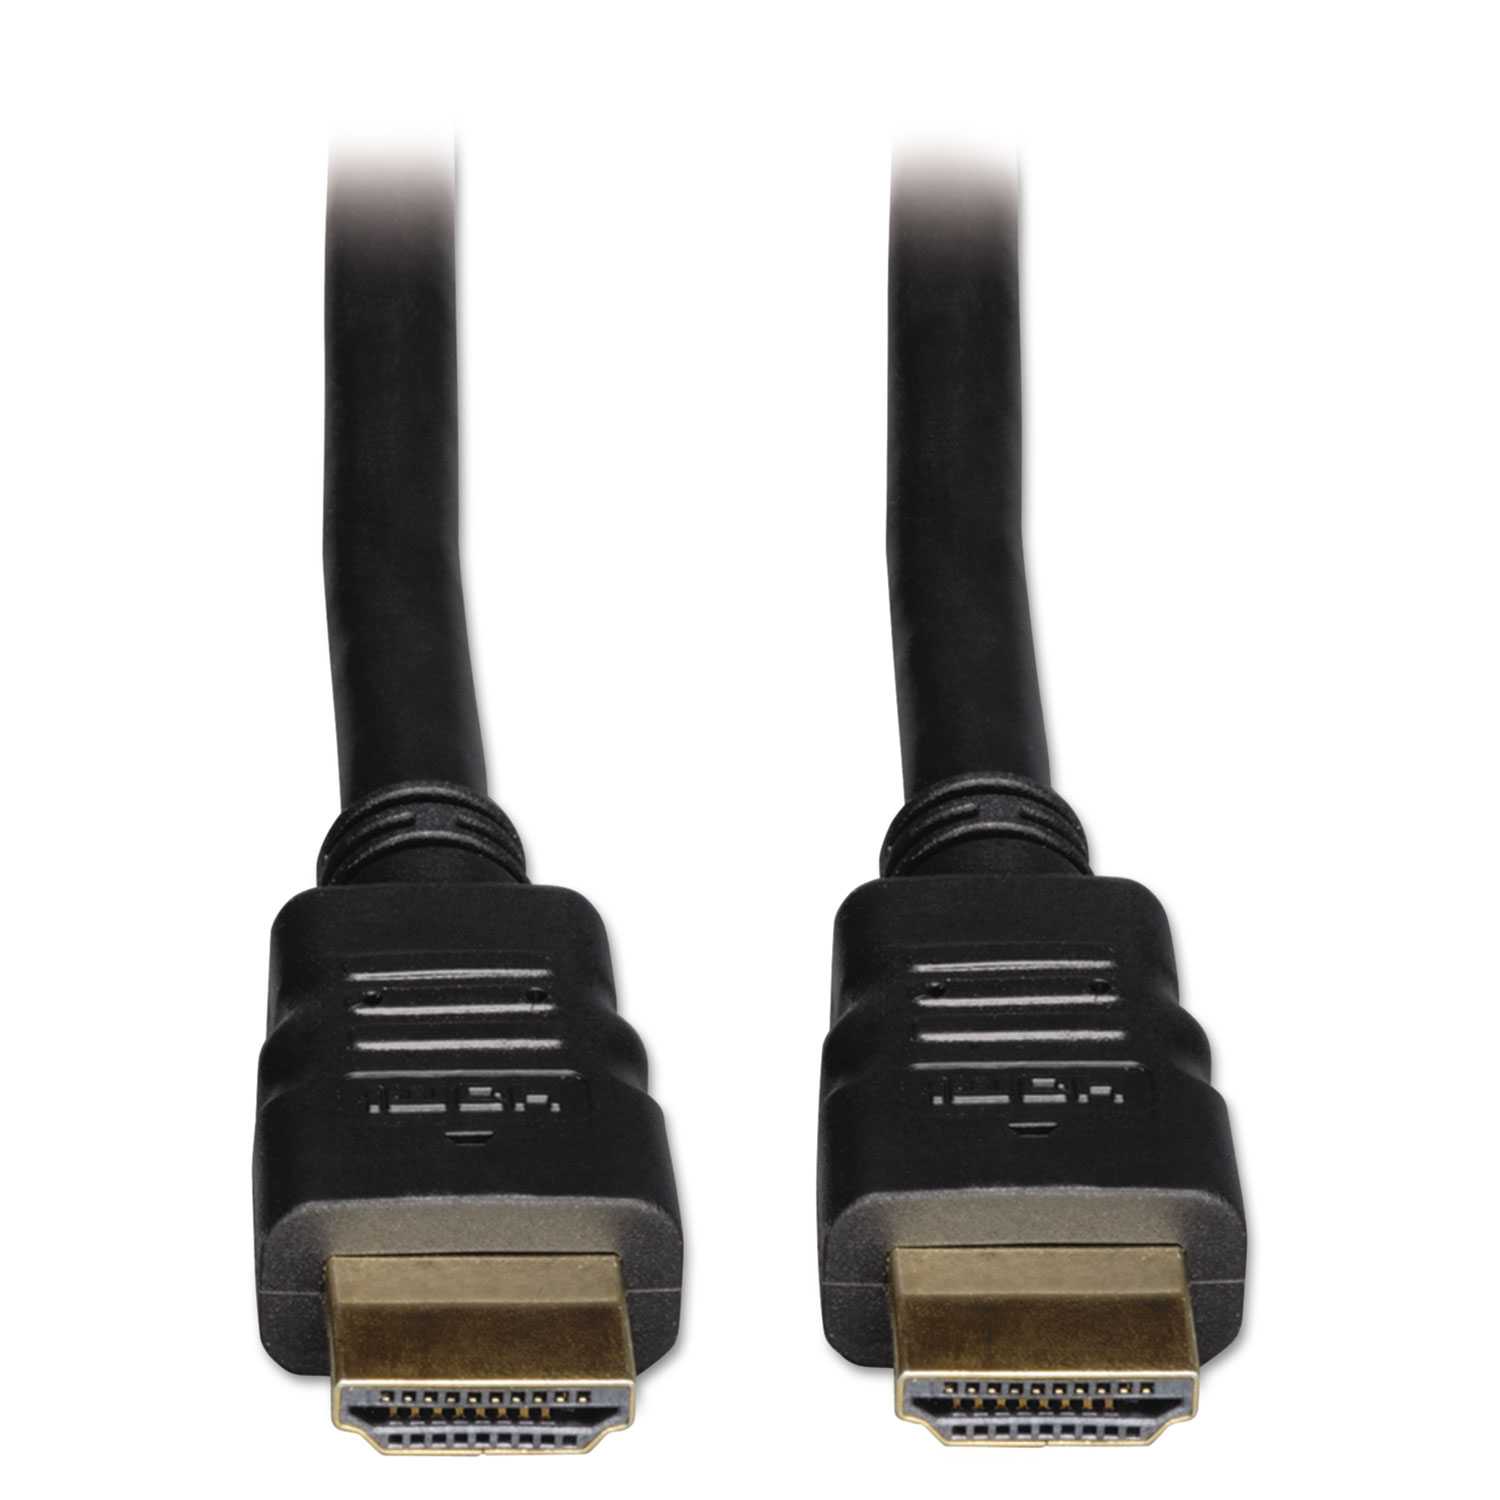  Tripp Lite P569-010 High Speed HDMI Cable with Ethernet, Ultra HD 4K x 2K, (M/M), 10 ft., Black (TRPP569010) 